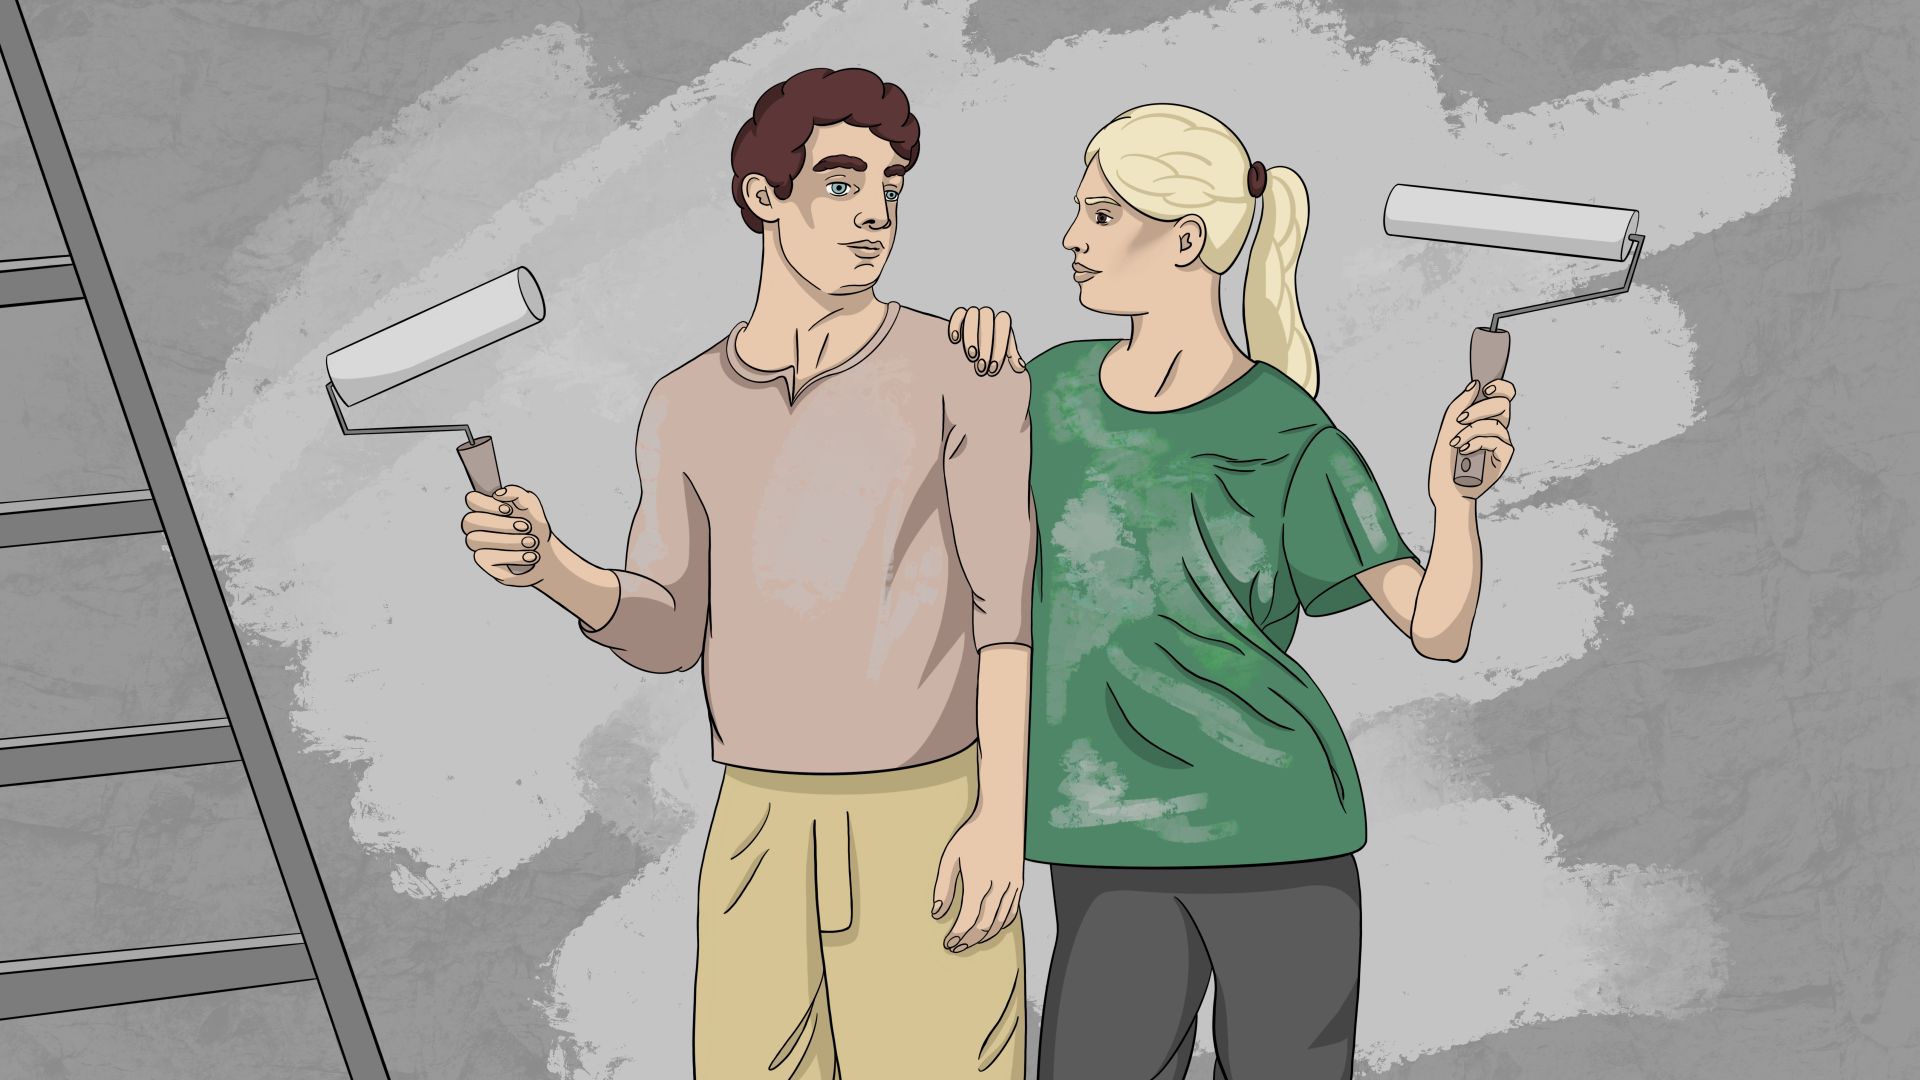 An illustration of a man and a woman painting a wall.